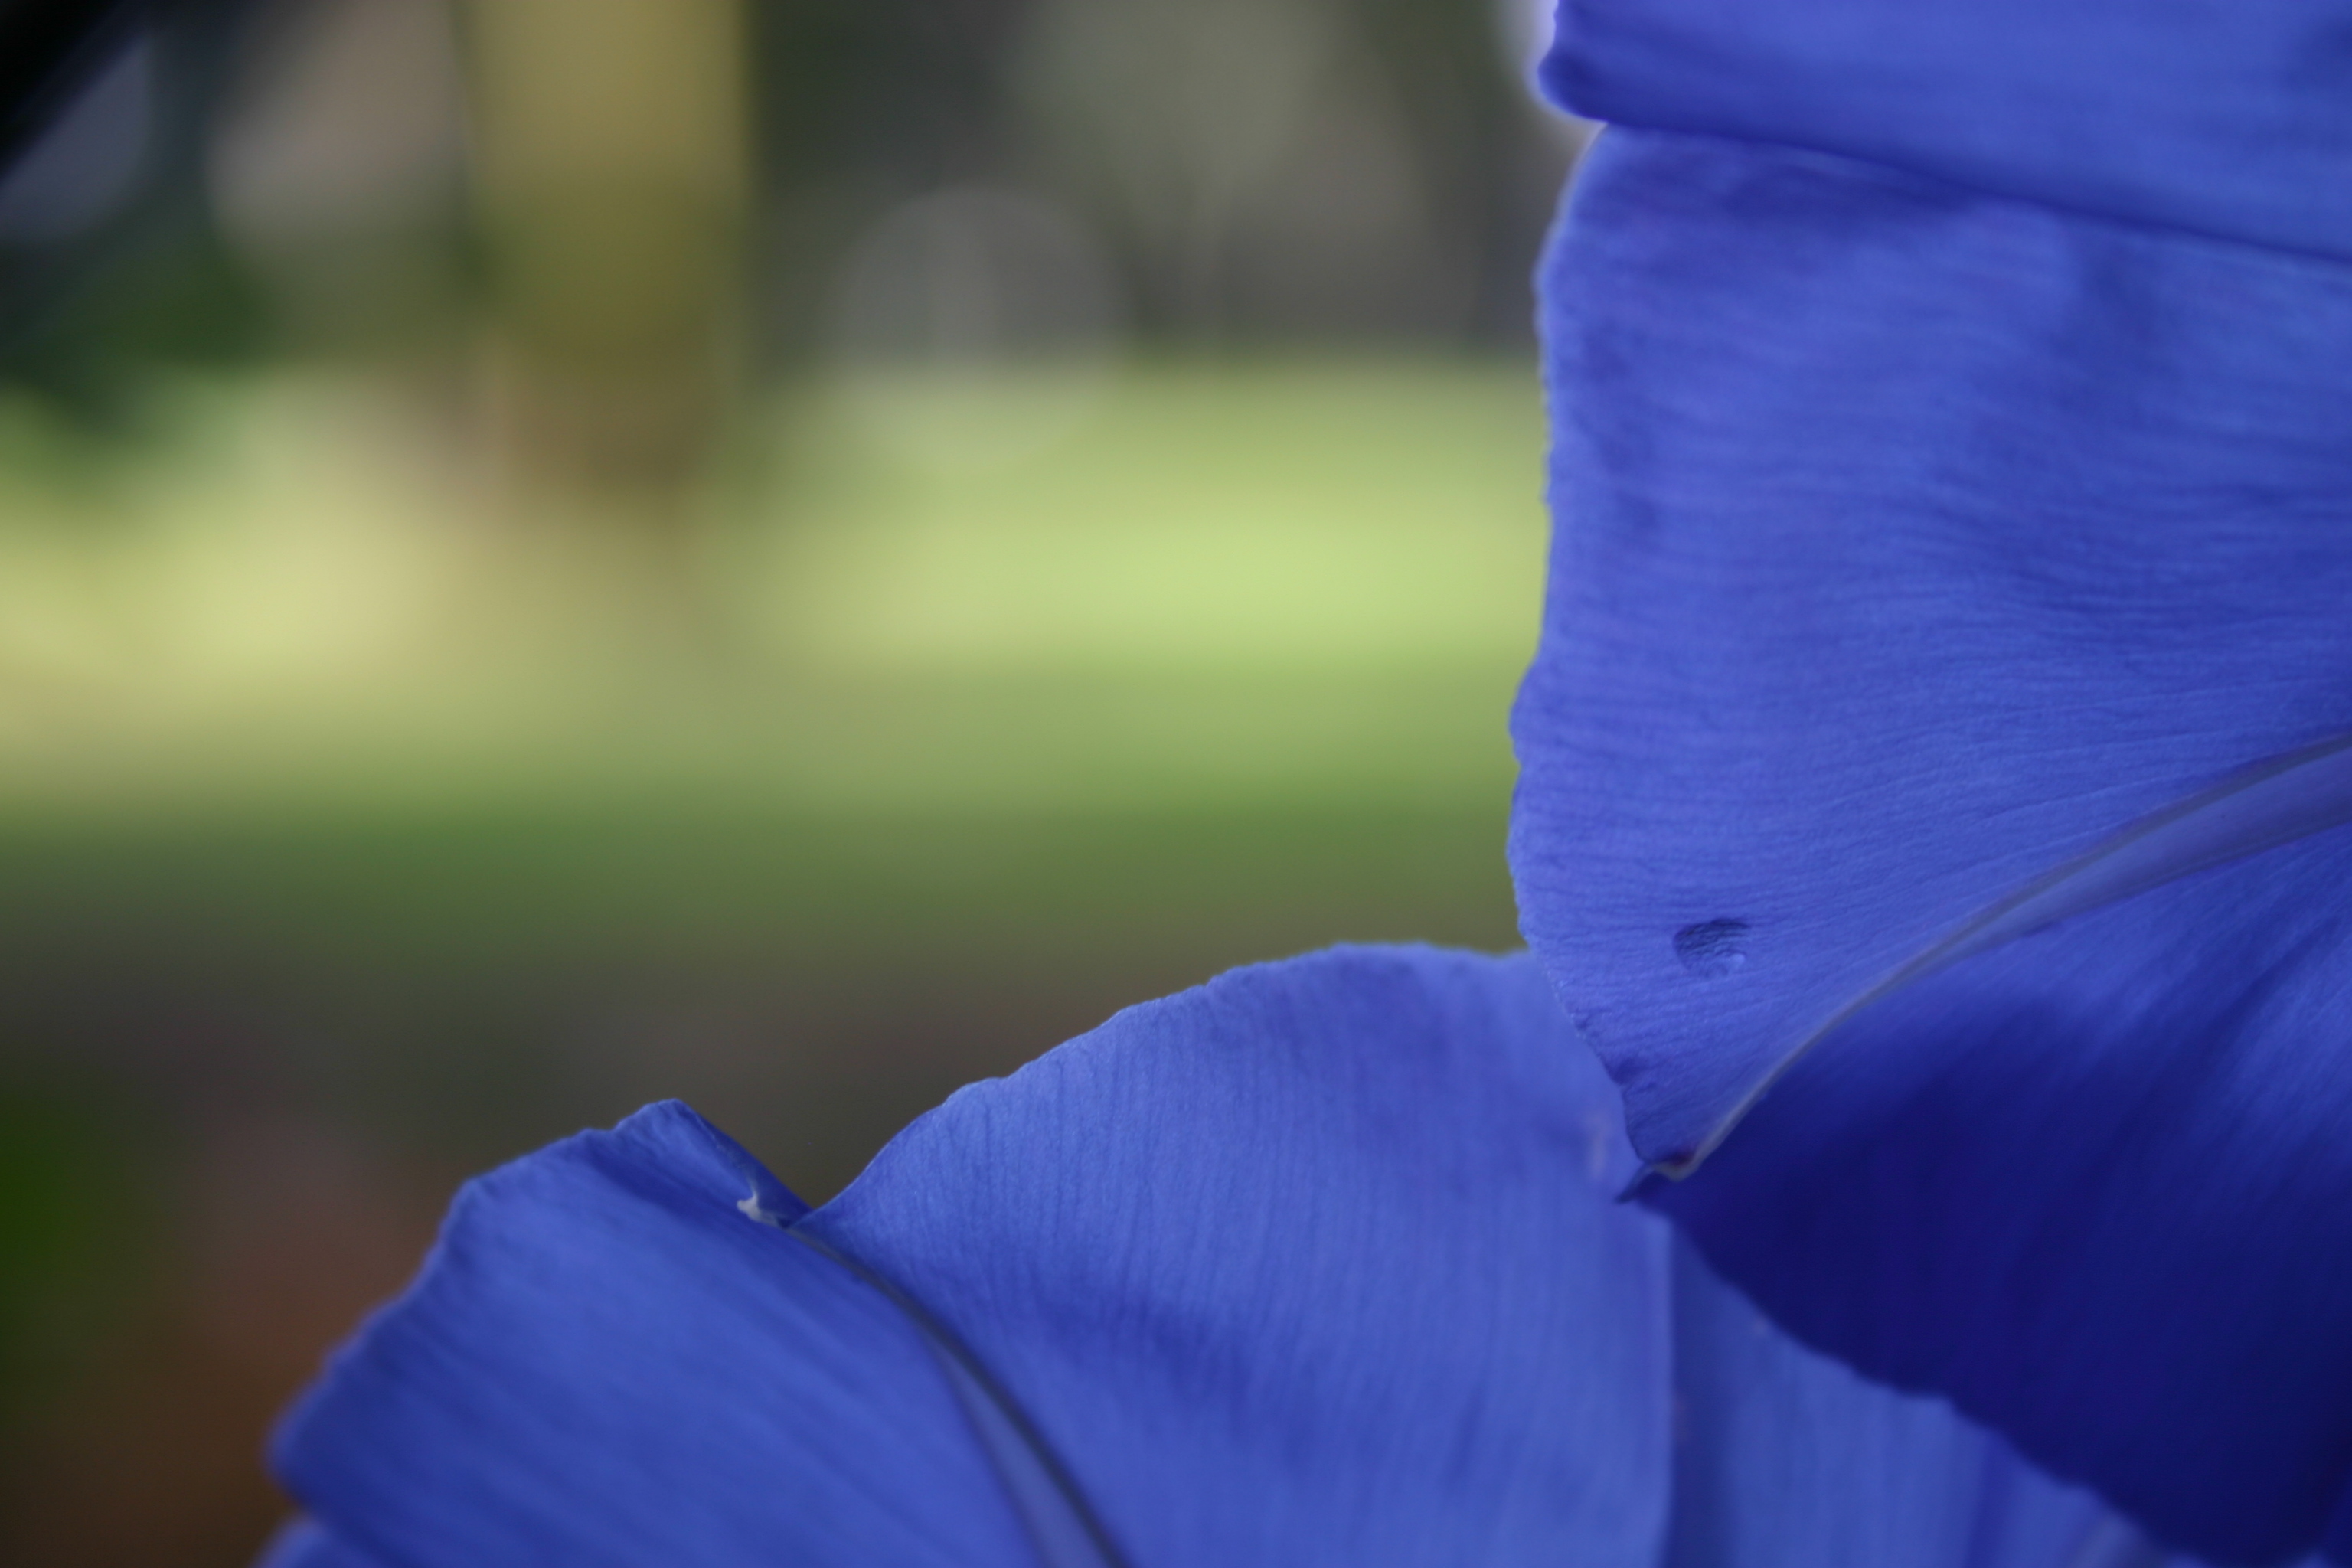 A frame of "Heavenly Blue" Morning Glory petals.